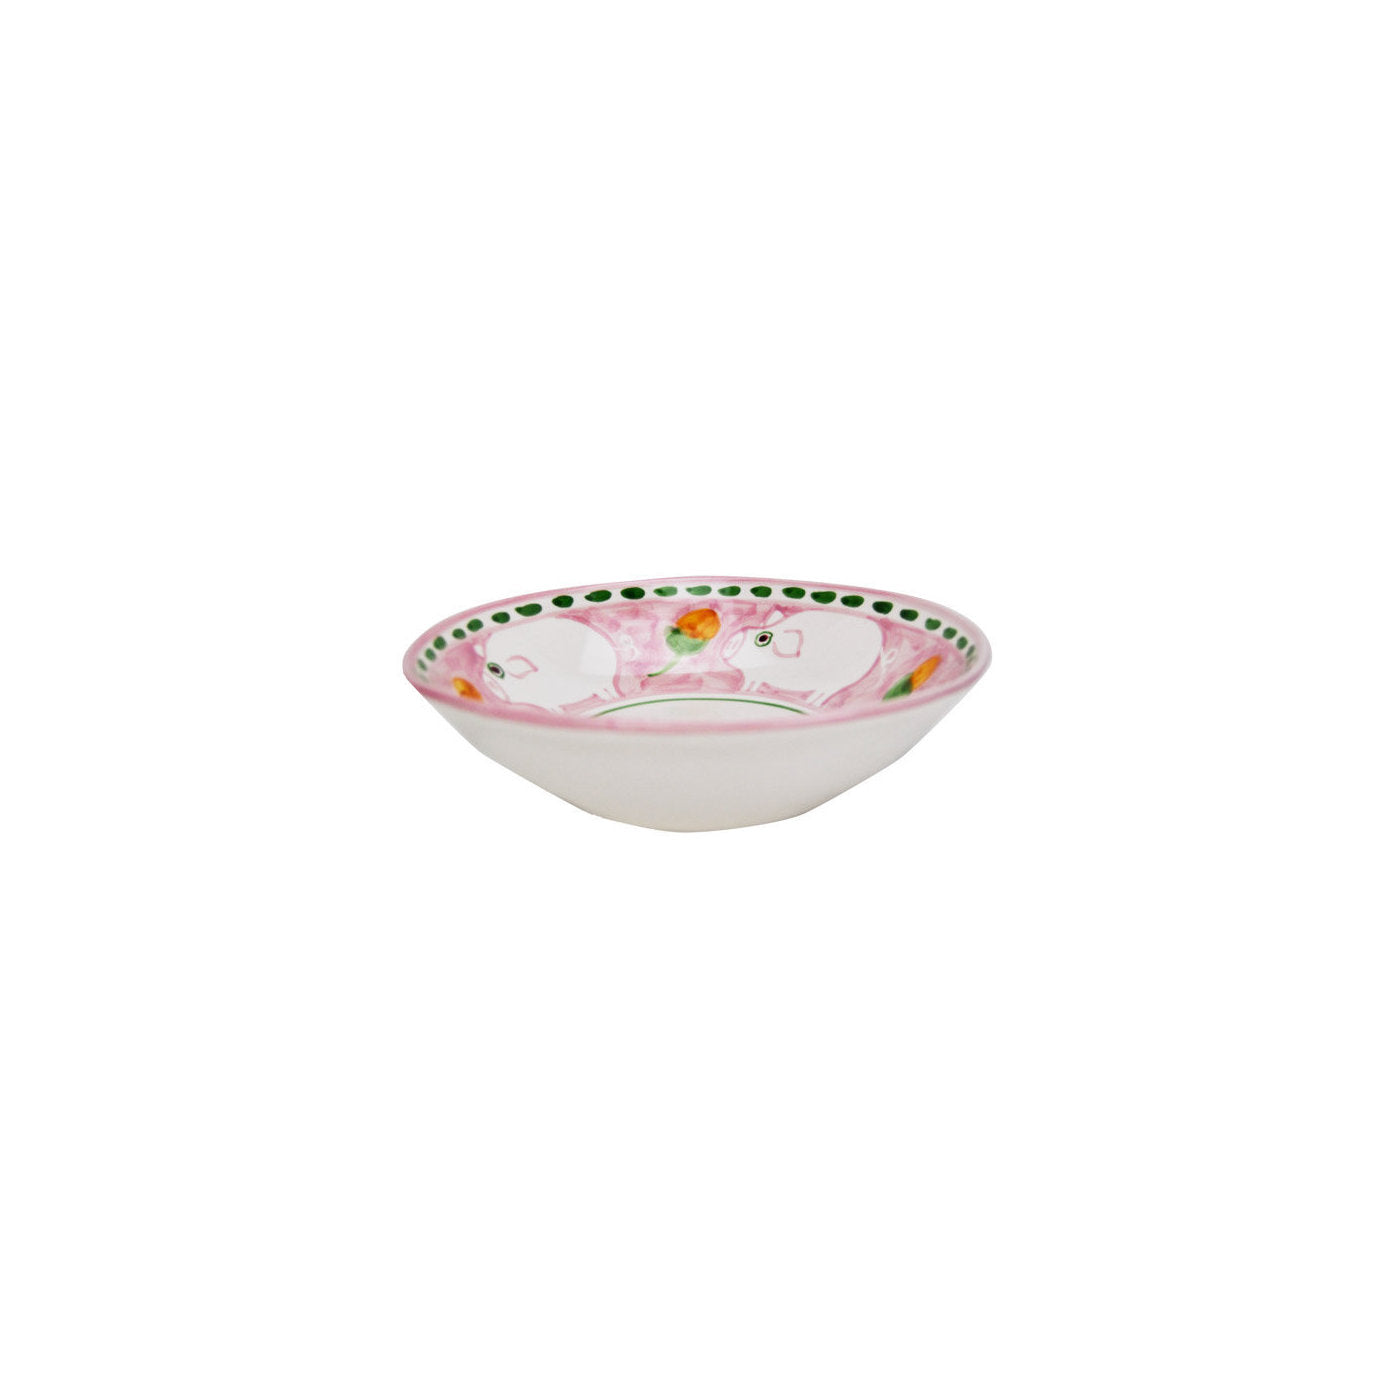 Cortile 18-Piece Pink Plate Setting - Alternative view 3